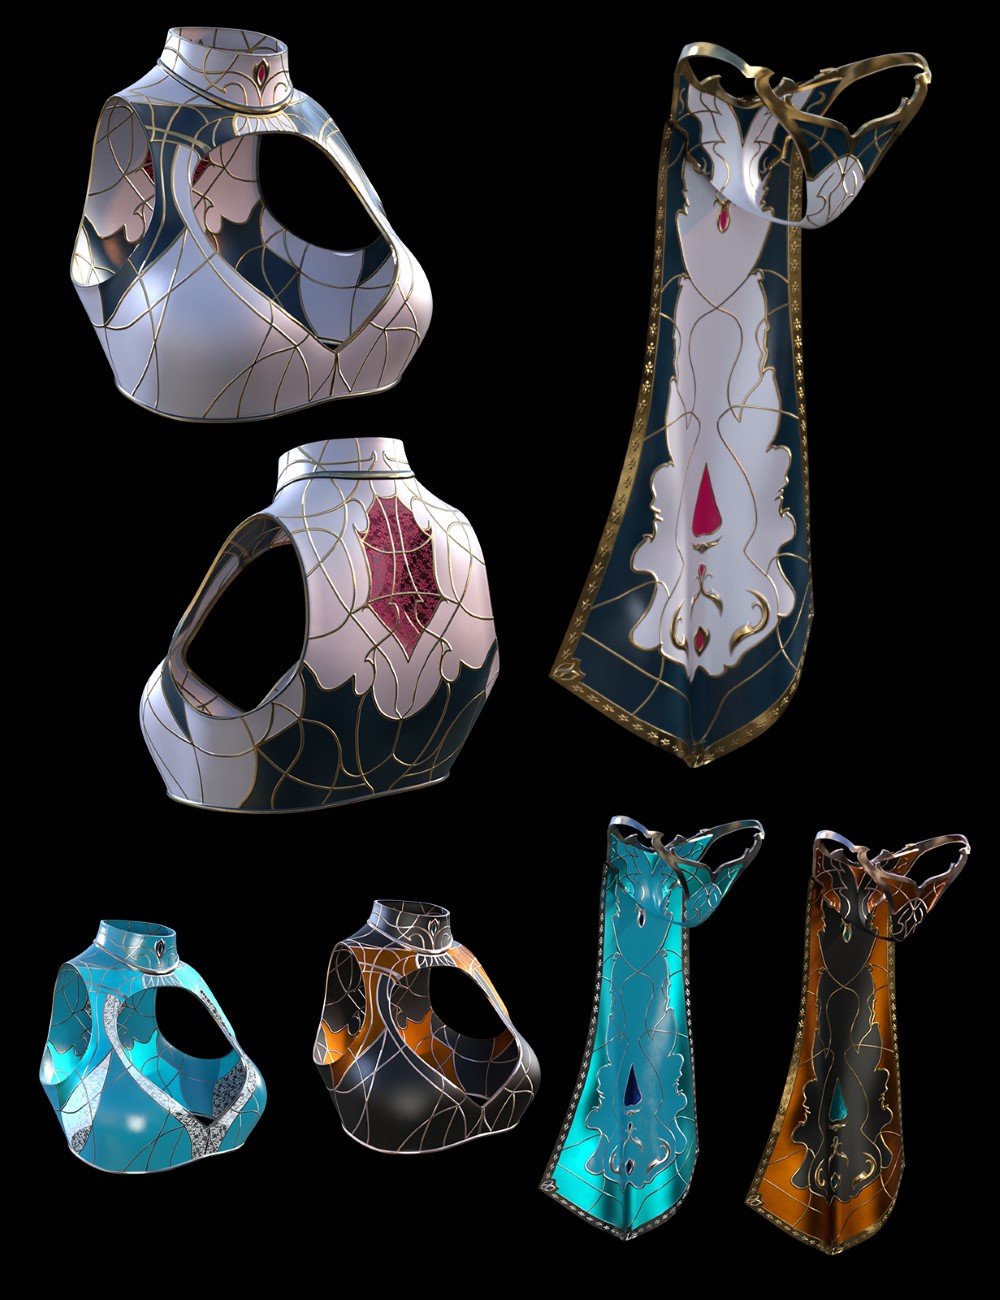 dForce ZK Elpis Mage Armor Chest, Waist, and Cape for Genesis 8 and 8.1 Females